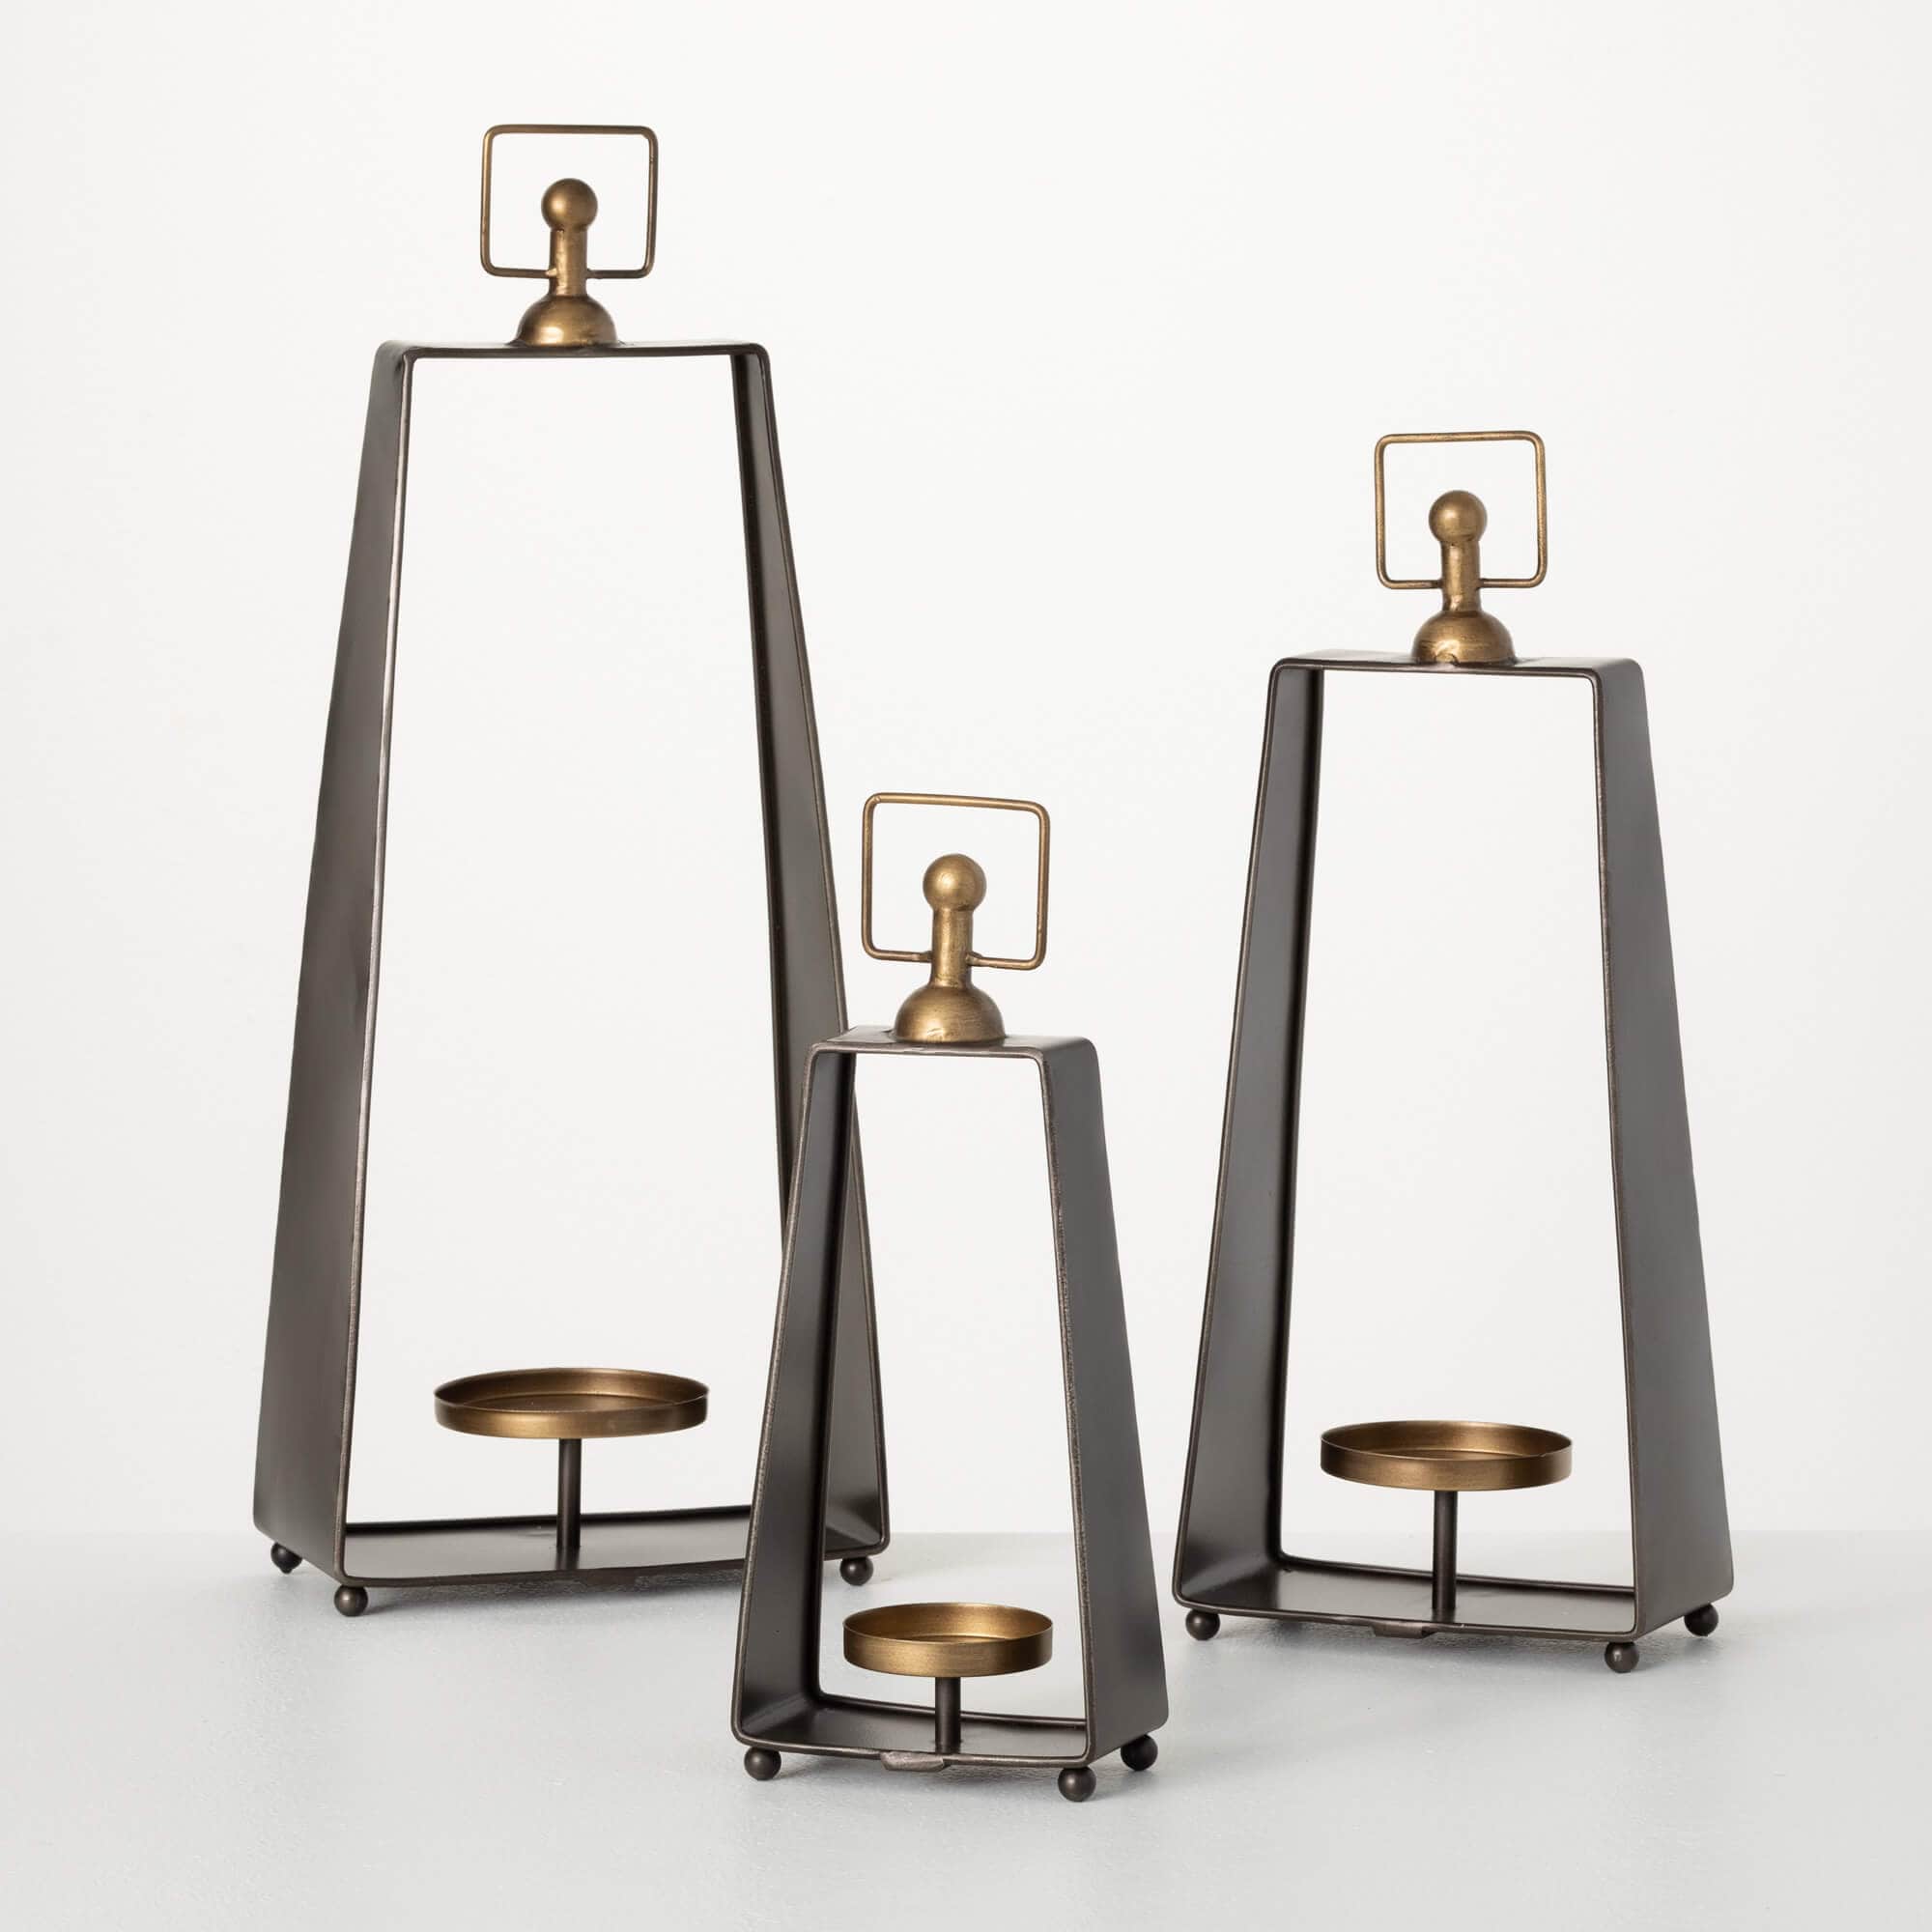 Tapered Framed Candle Holders Elevate Home Decor - Candle Holders